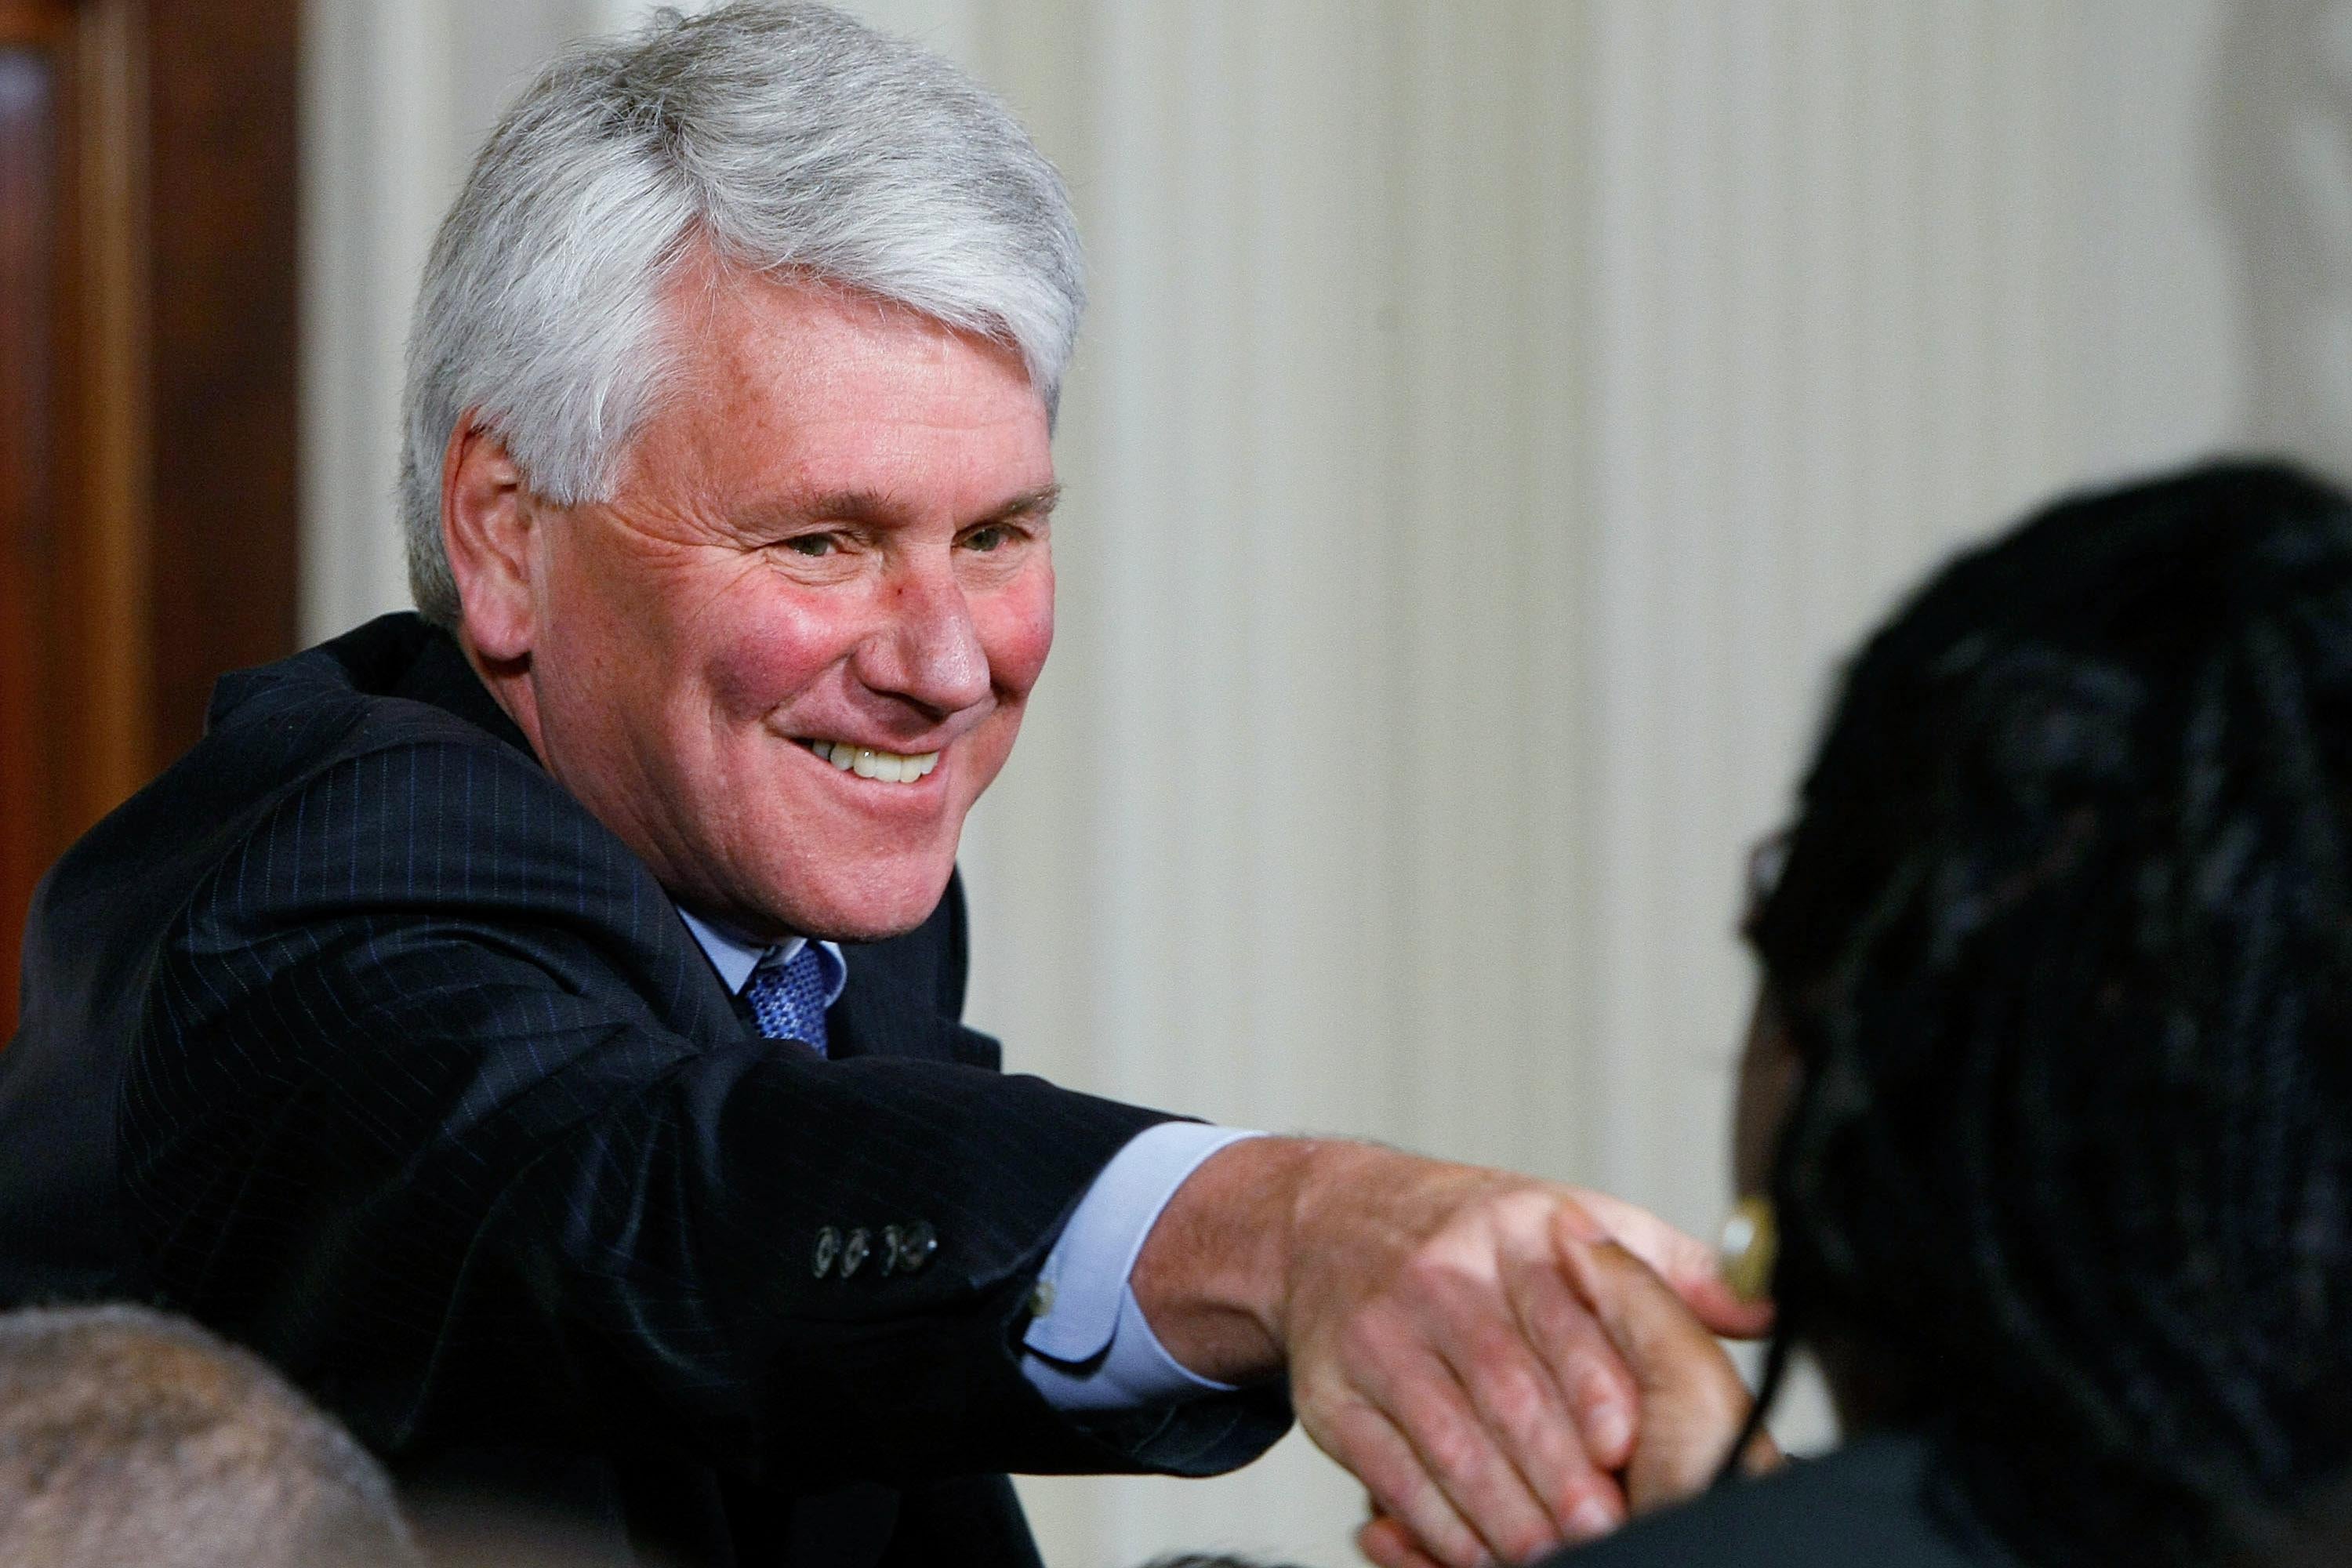 Then–White House counsel Greg Craig in the White House on May 26, 2009 in Washington.